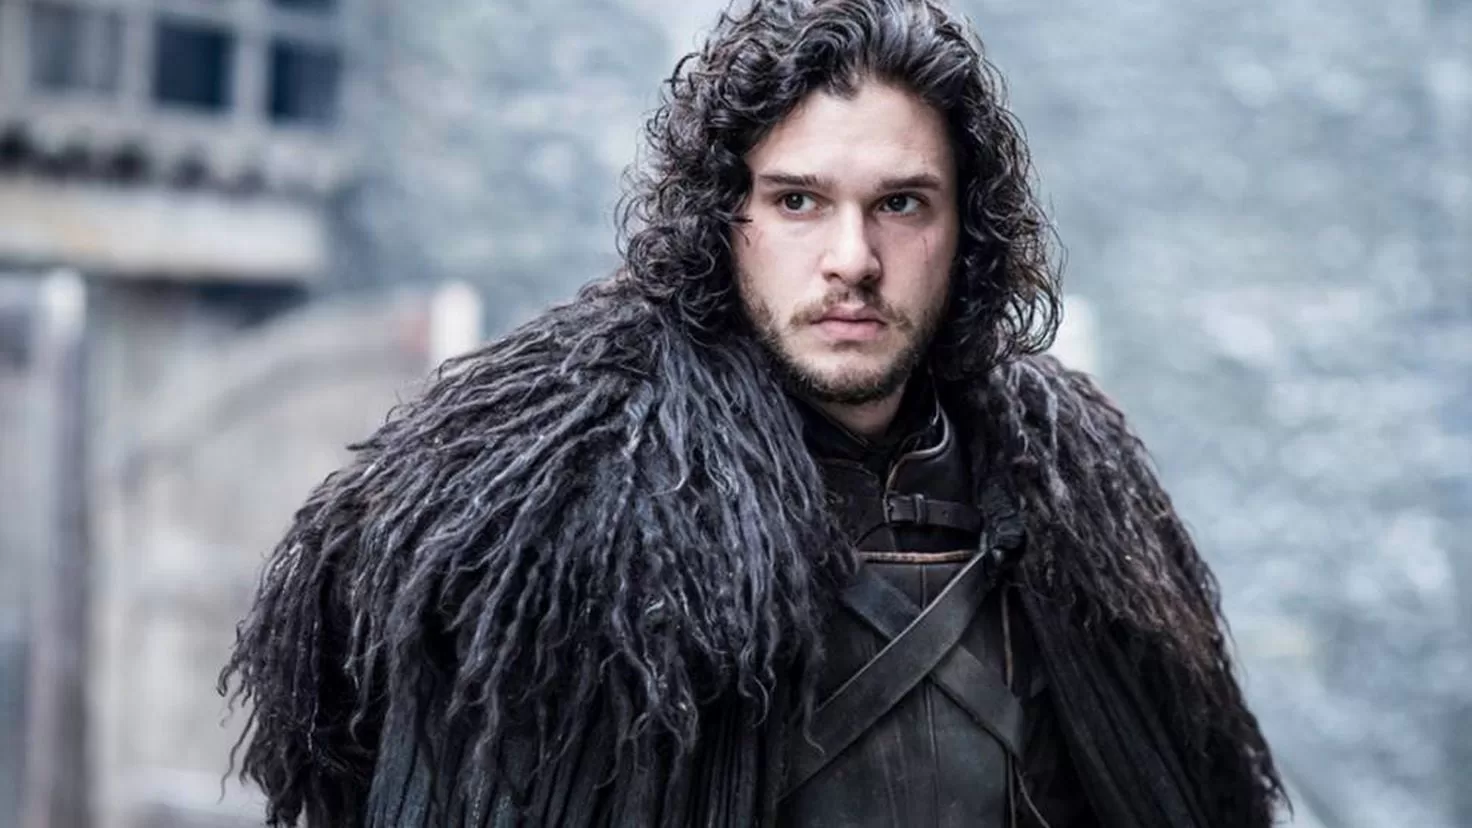 Kit Harington talks about his ADHD after Game of Thrones: I can't deal with it
